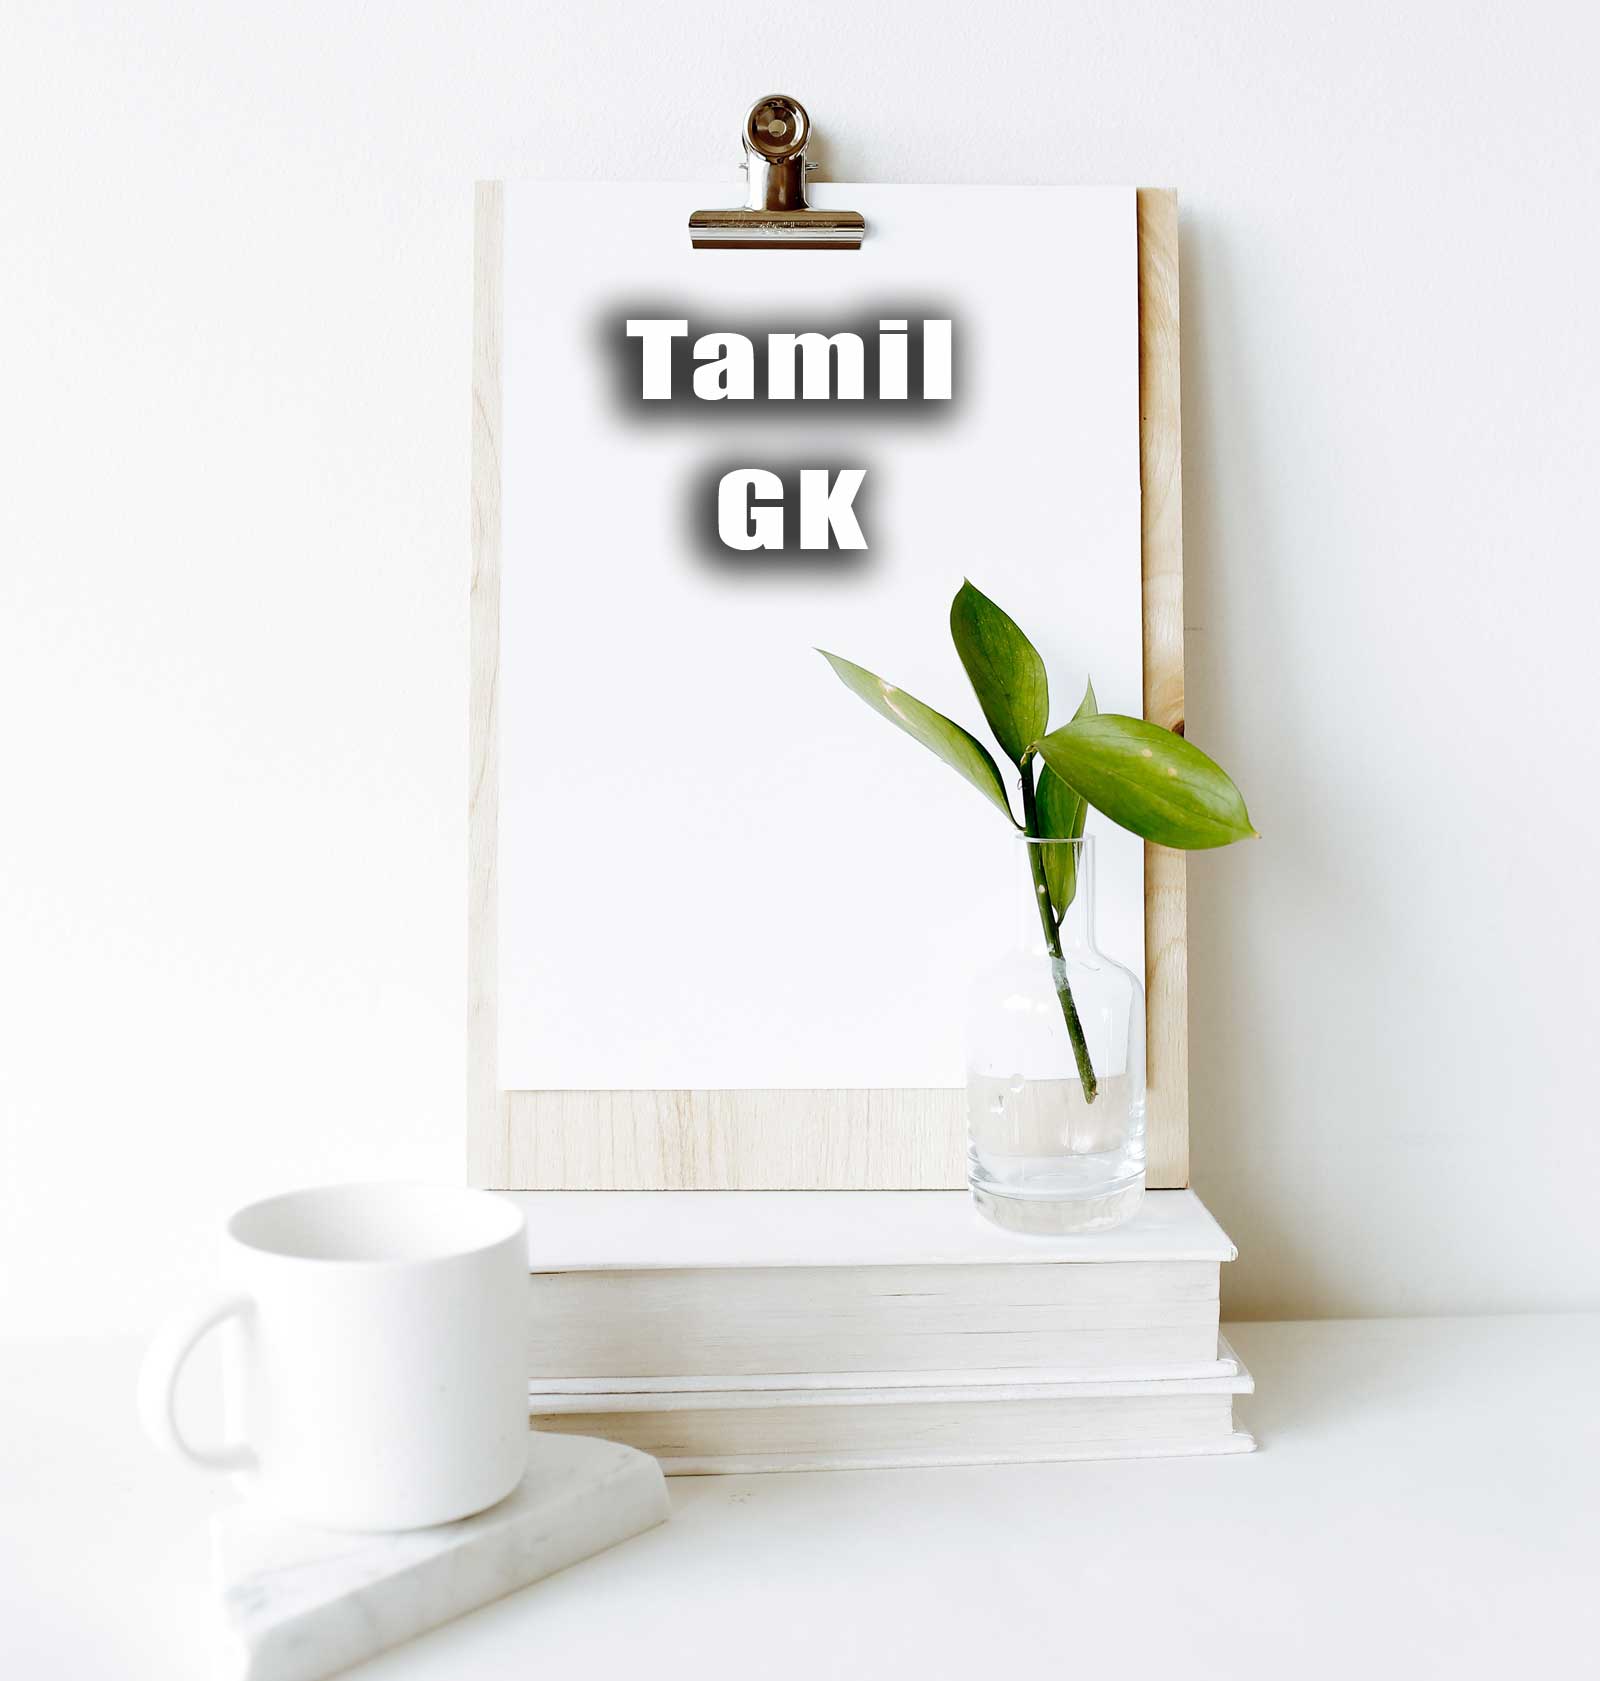 Tamil GK Previous Year Questions and Answers